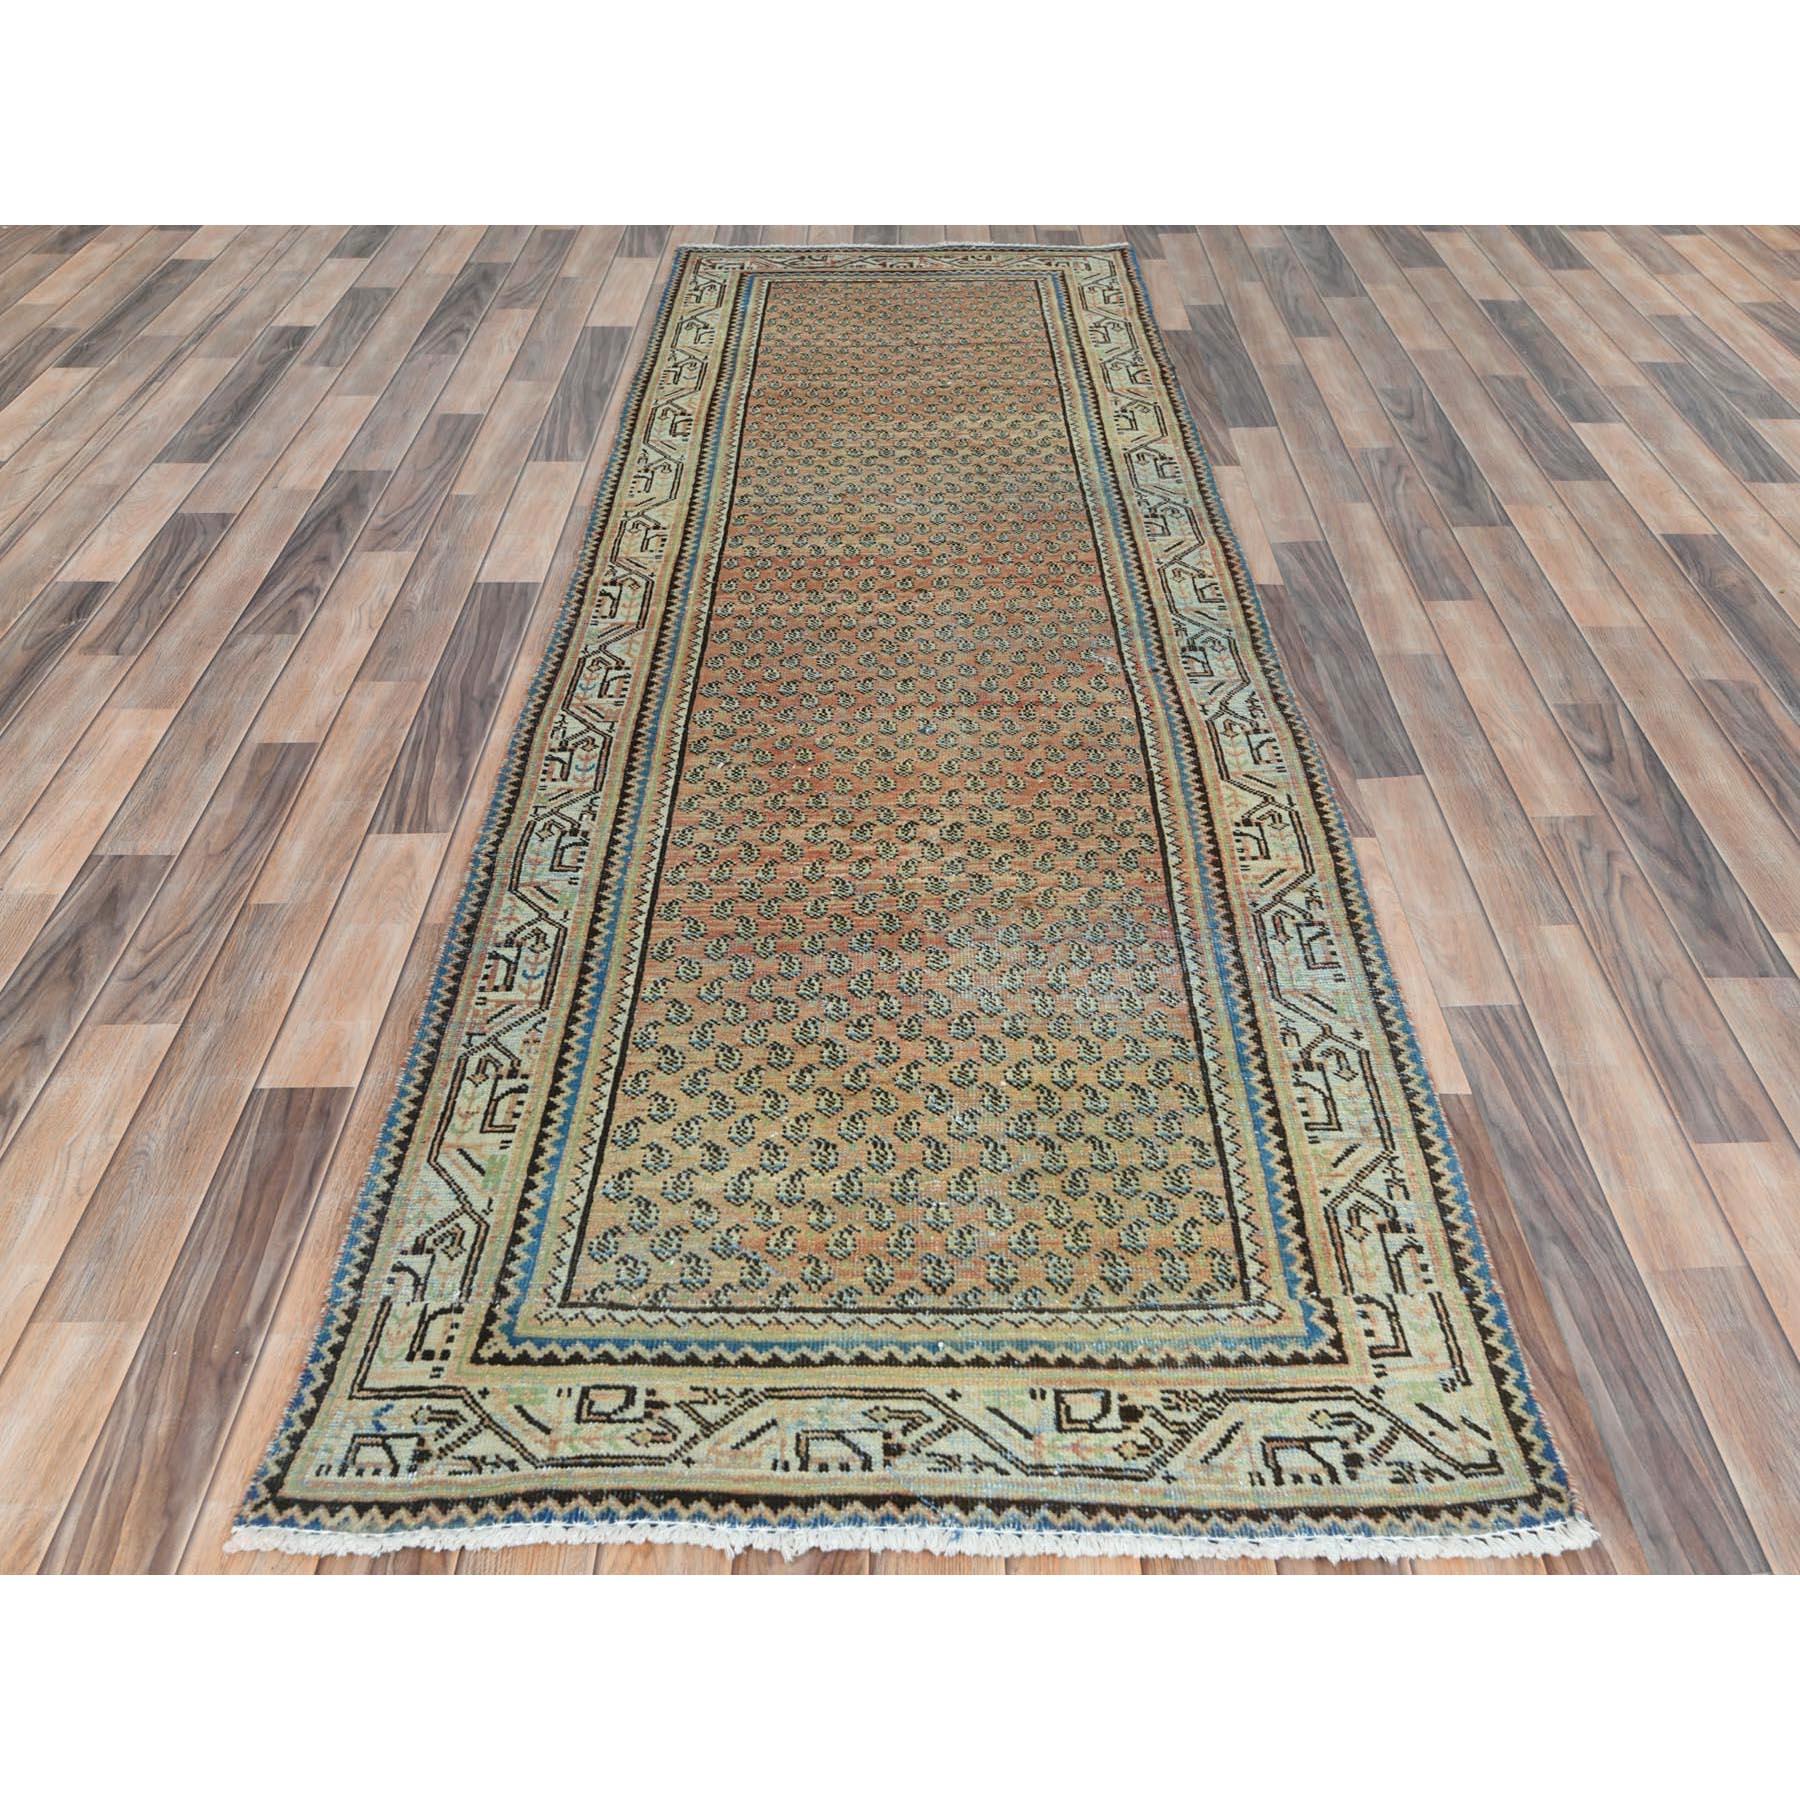 This fabulous hand-knotted carpet has been created and designed for extra strength and durability. This rug has been handcrafted for weeks in the traditional method that is used to make
Exact Rug Size in Feet and Inches : 3'2